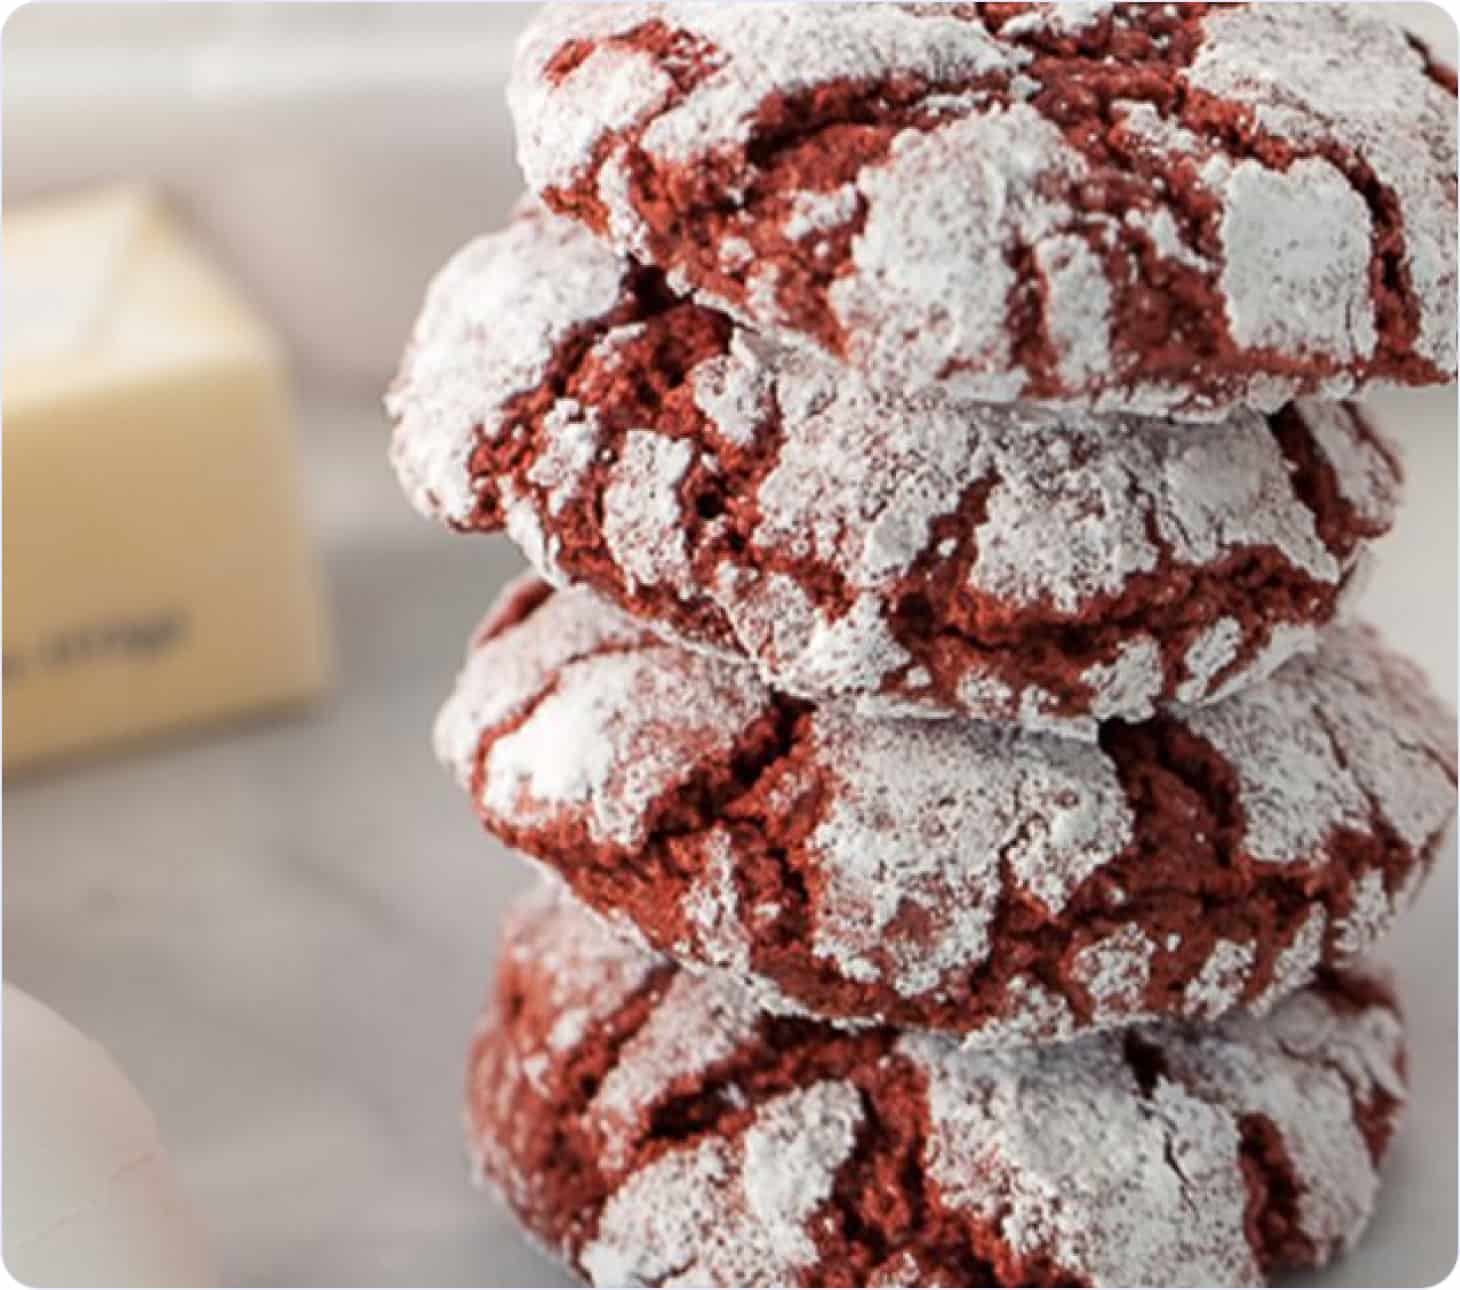 Red Christmas cookies sprinkled with powdered sugar